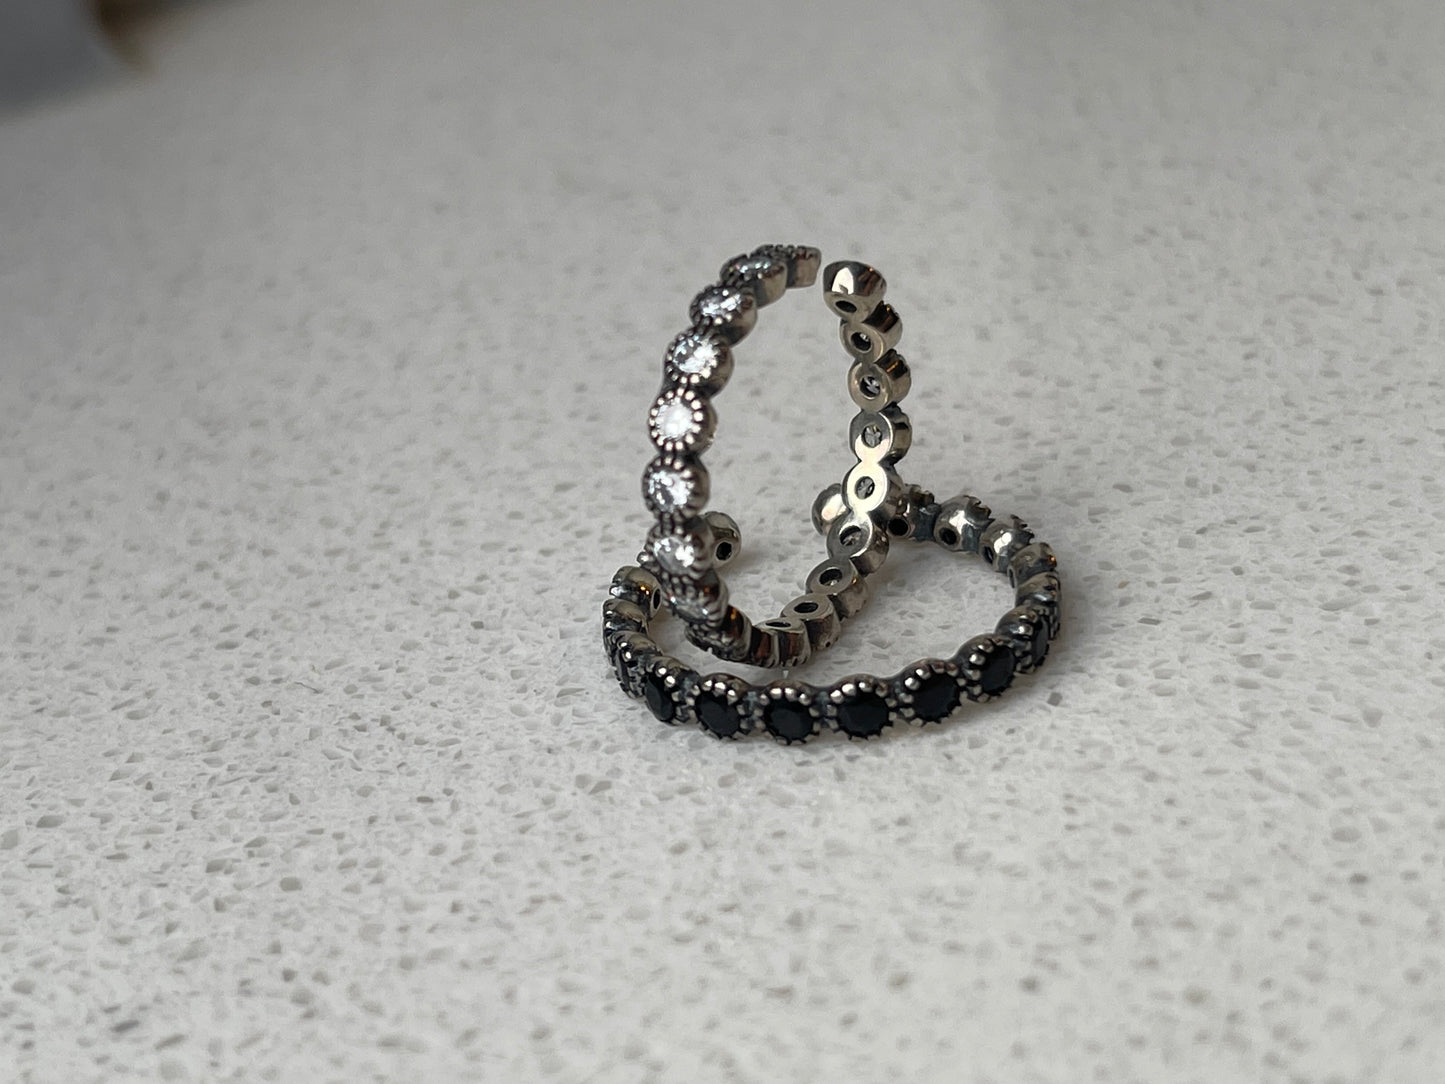 Lovaly ring